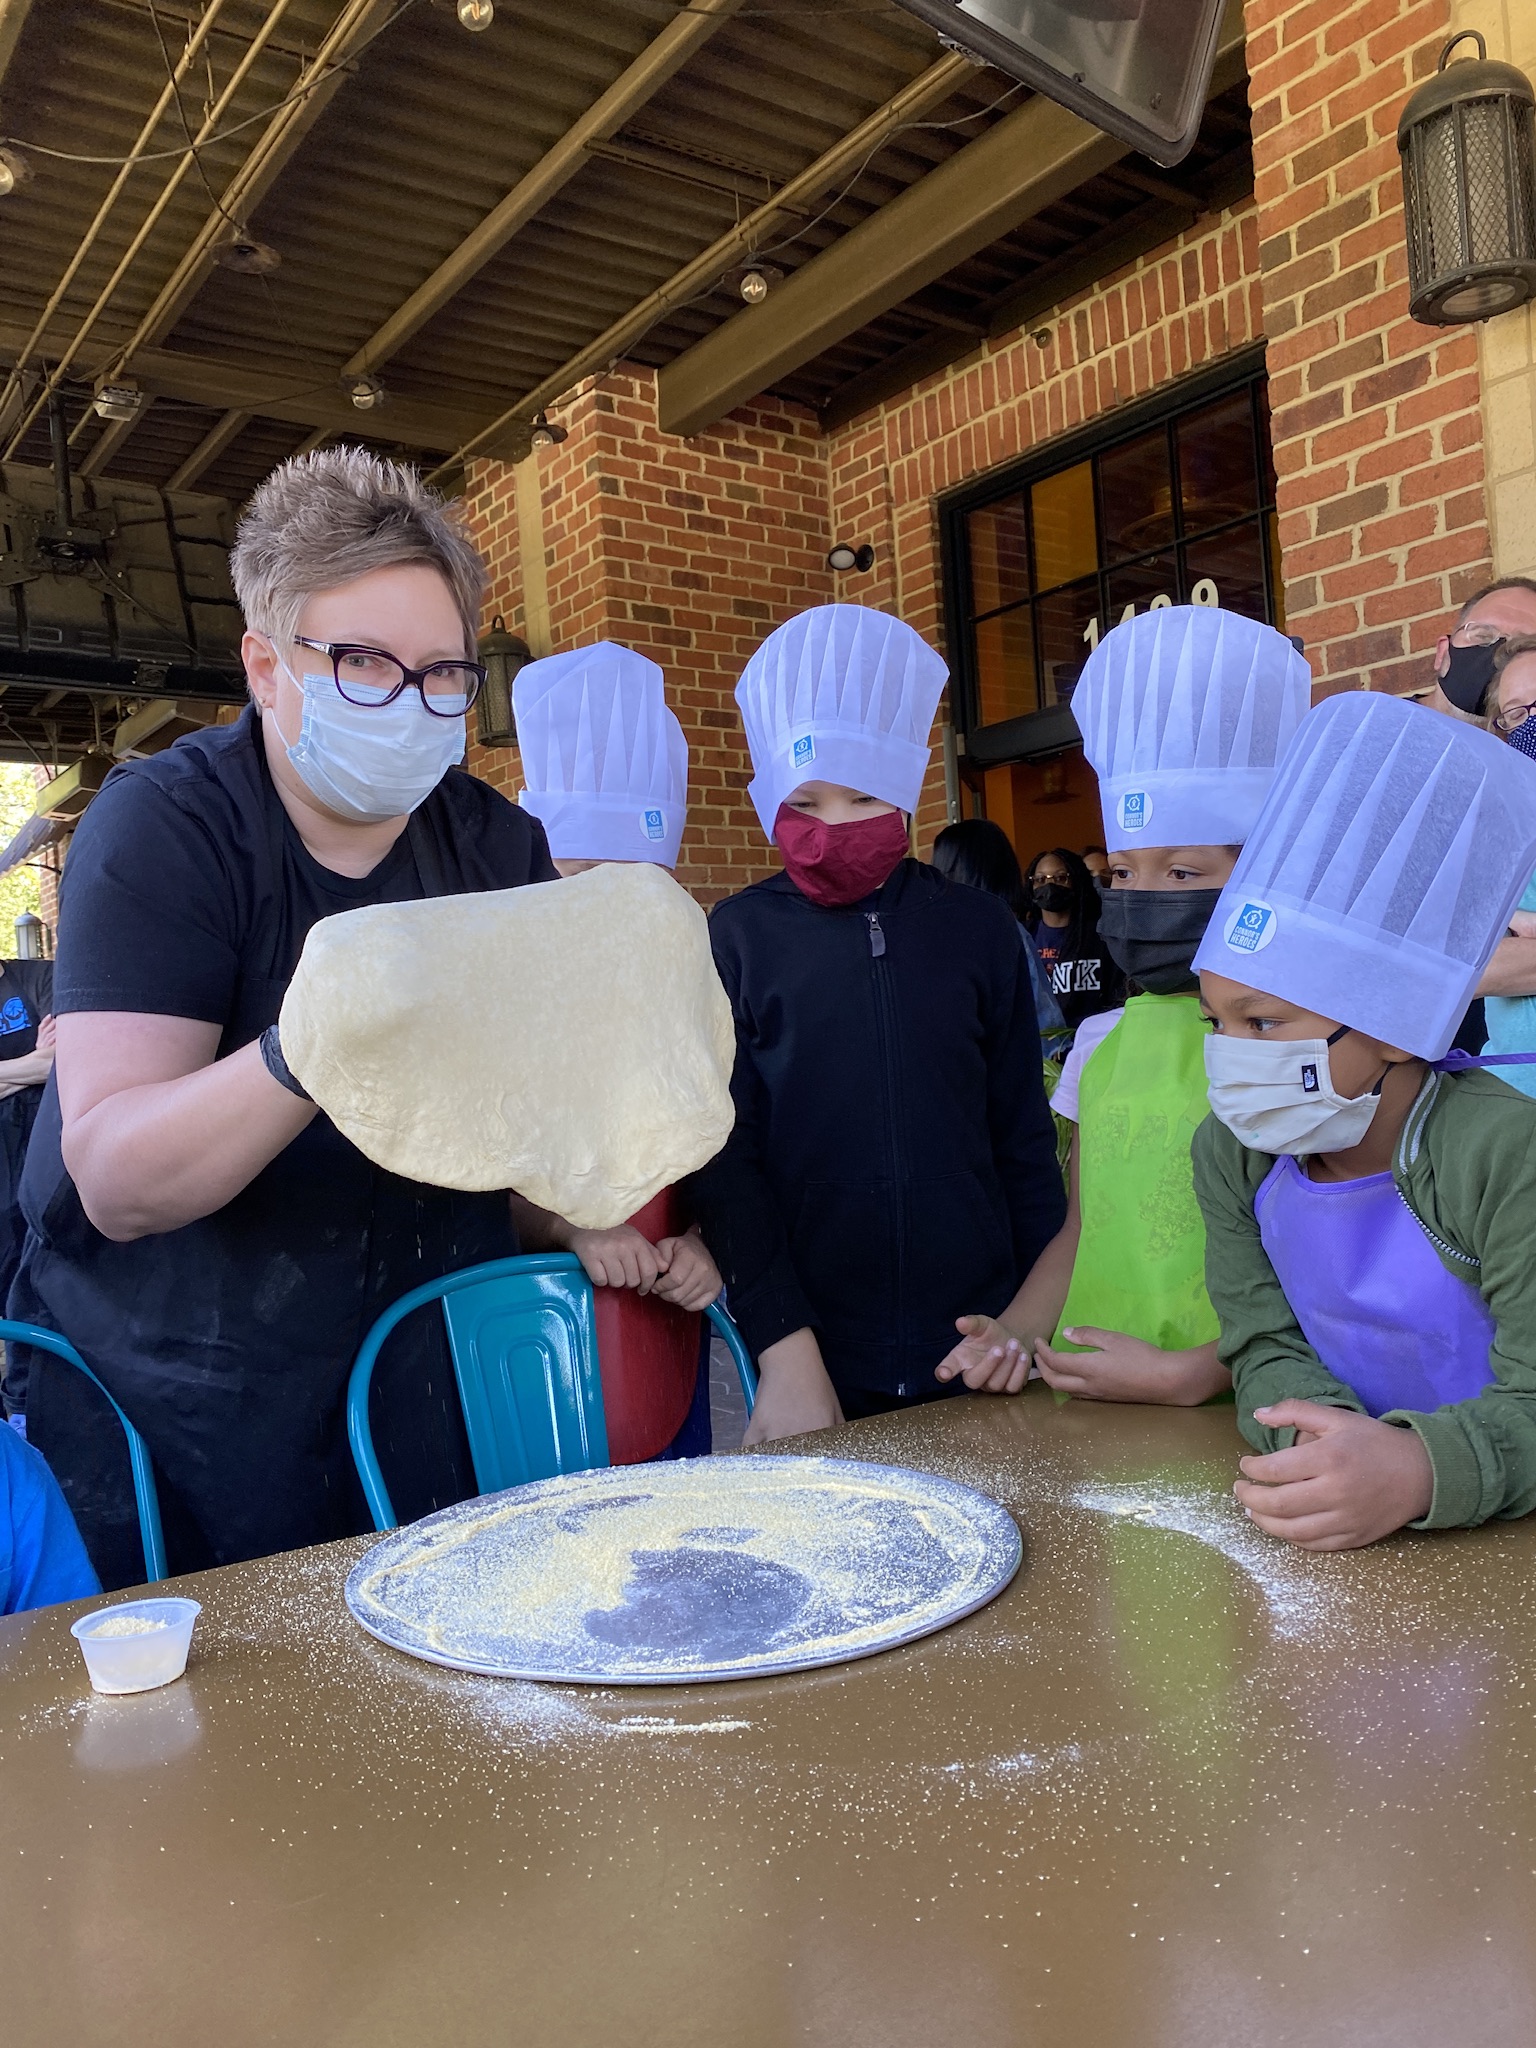 Image an adult helping a group of four kids roll a dough of pizza